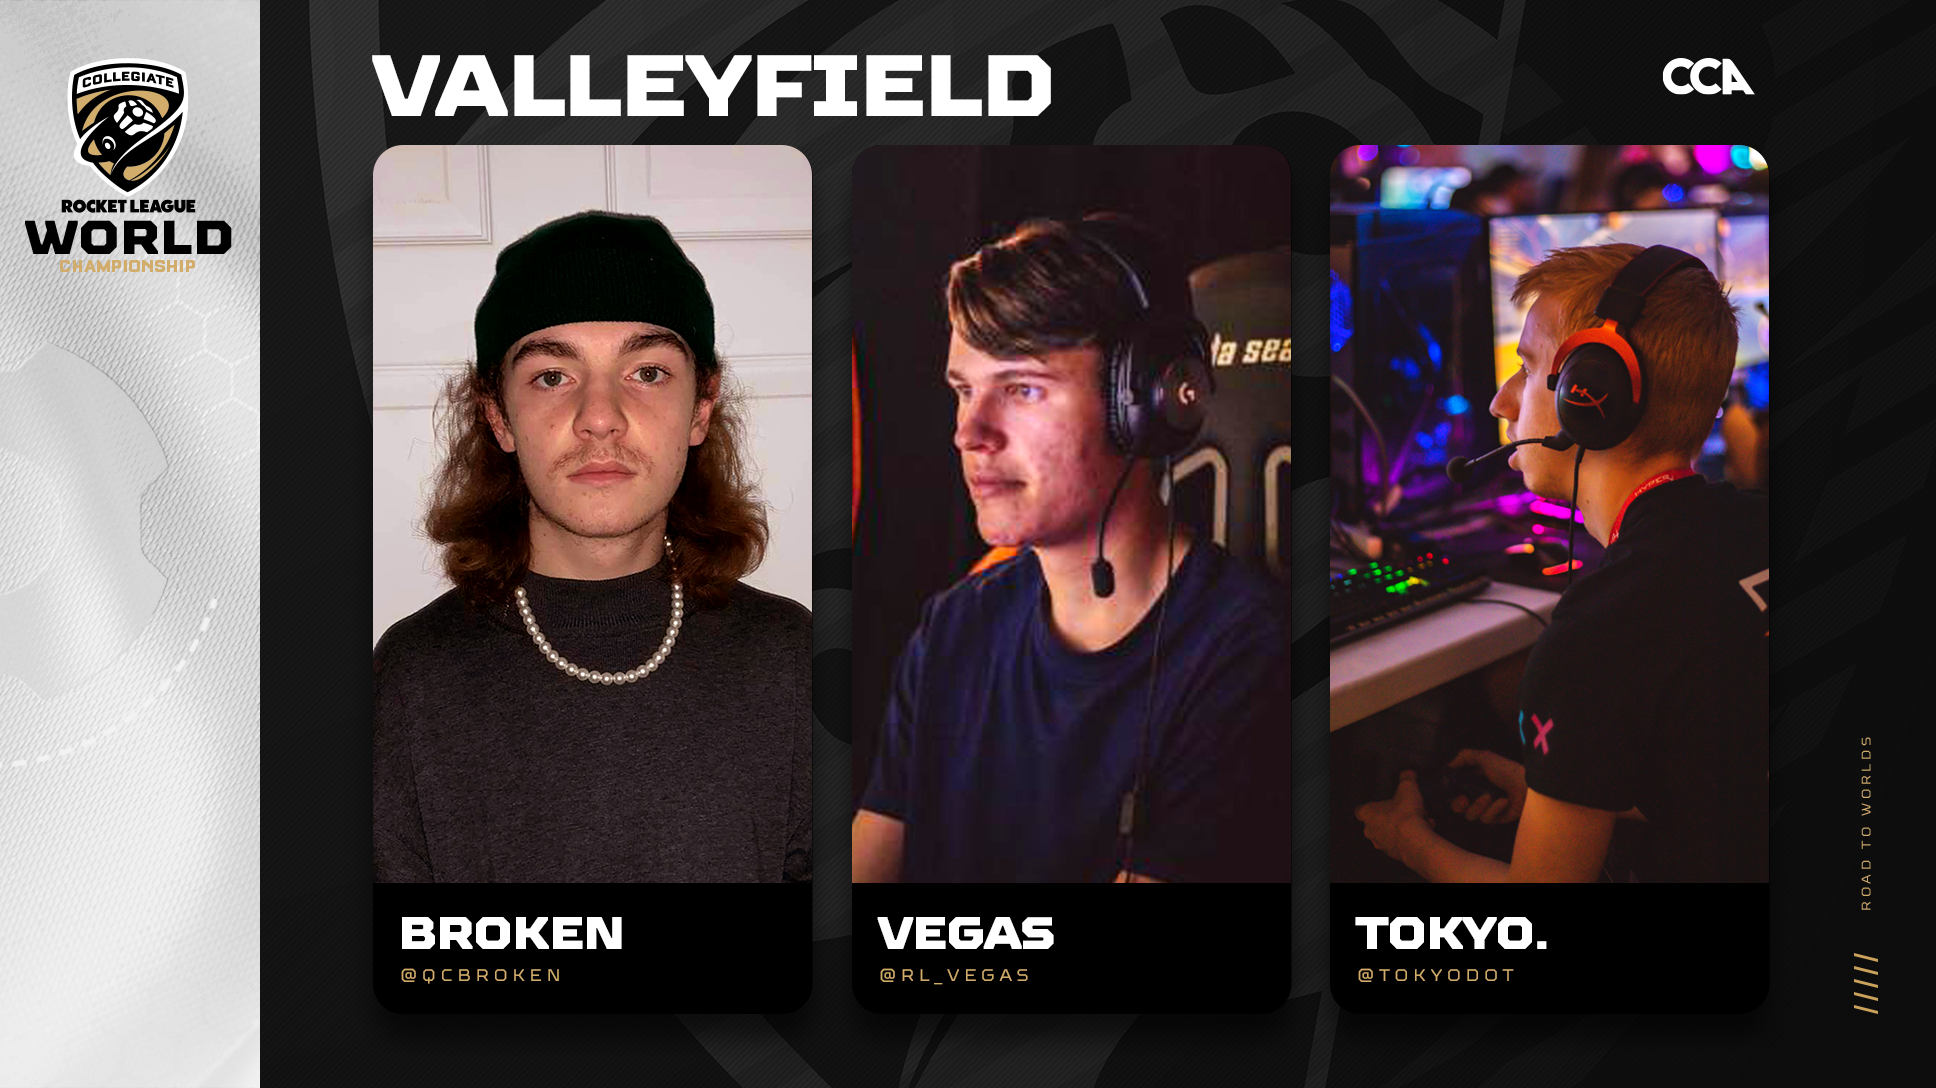 Valleyfield Road to Worlds header with images of Broken, Vegas, and tokyo.